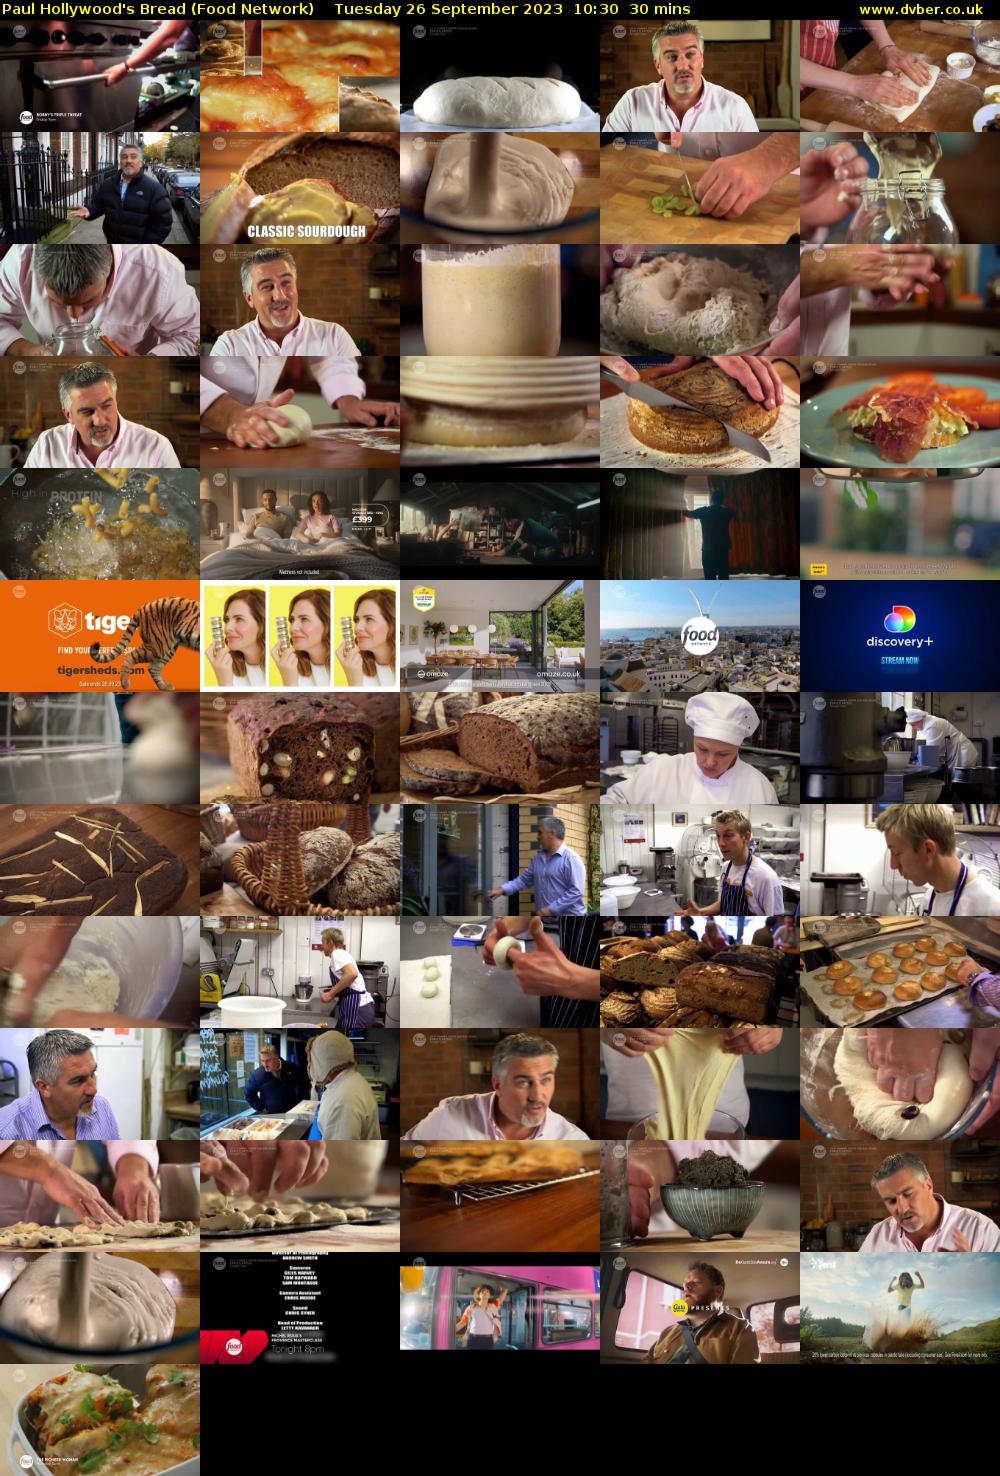 Paul Hollywood's Bread (Food Network) Tuesday 26 September 2023 10:30 - 11:00